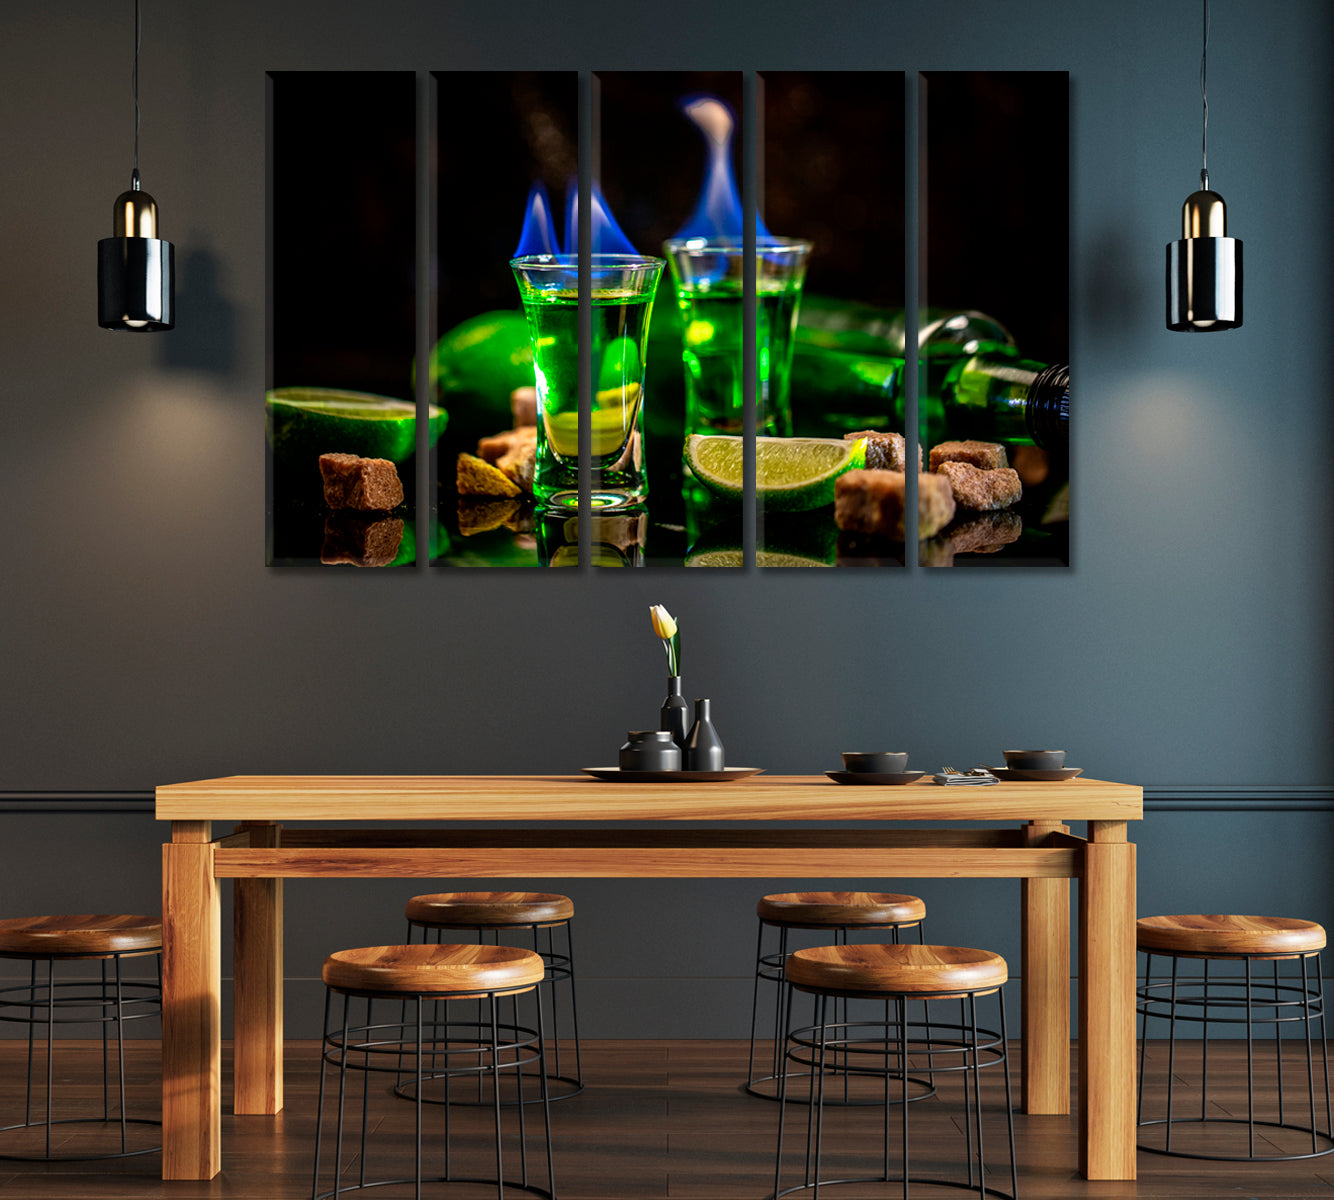 Absinthe with Brown Sugar and Lime Canvas Print ArtLexy   